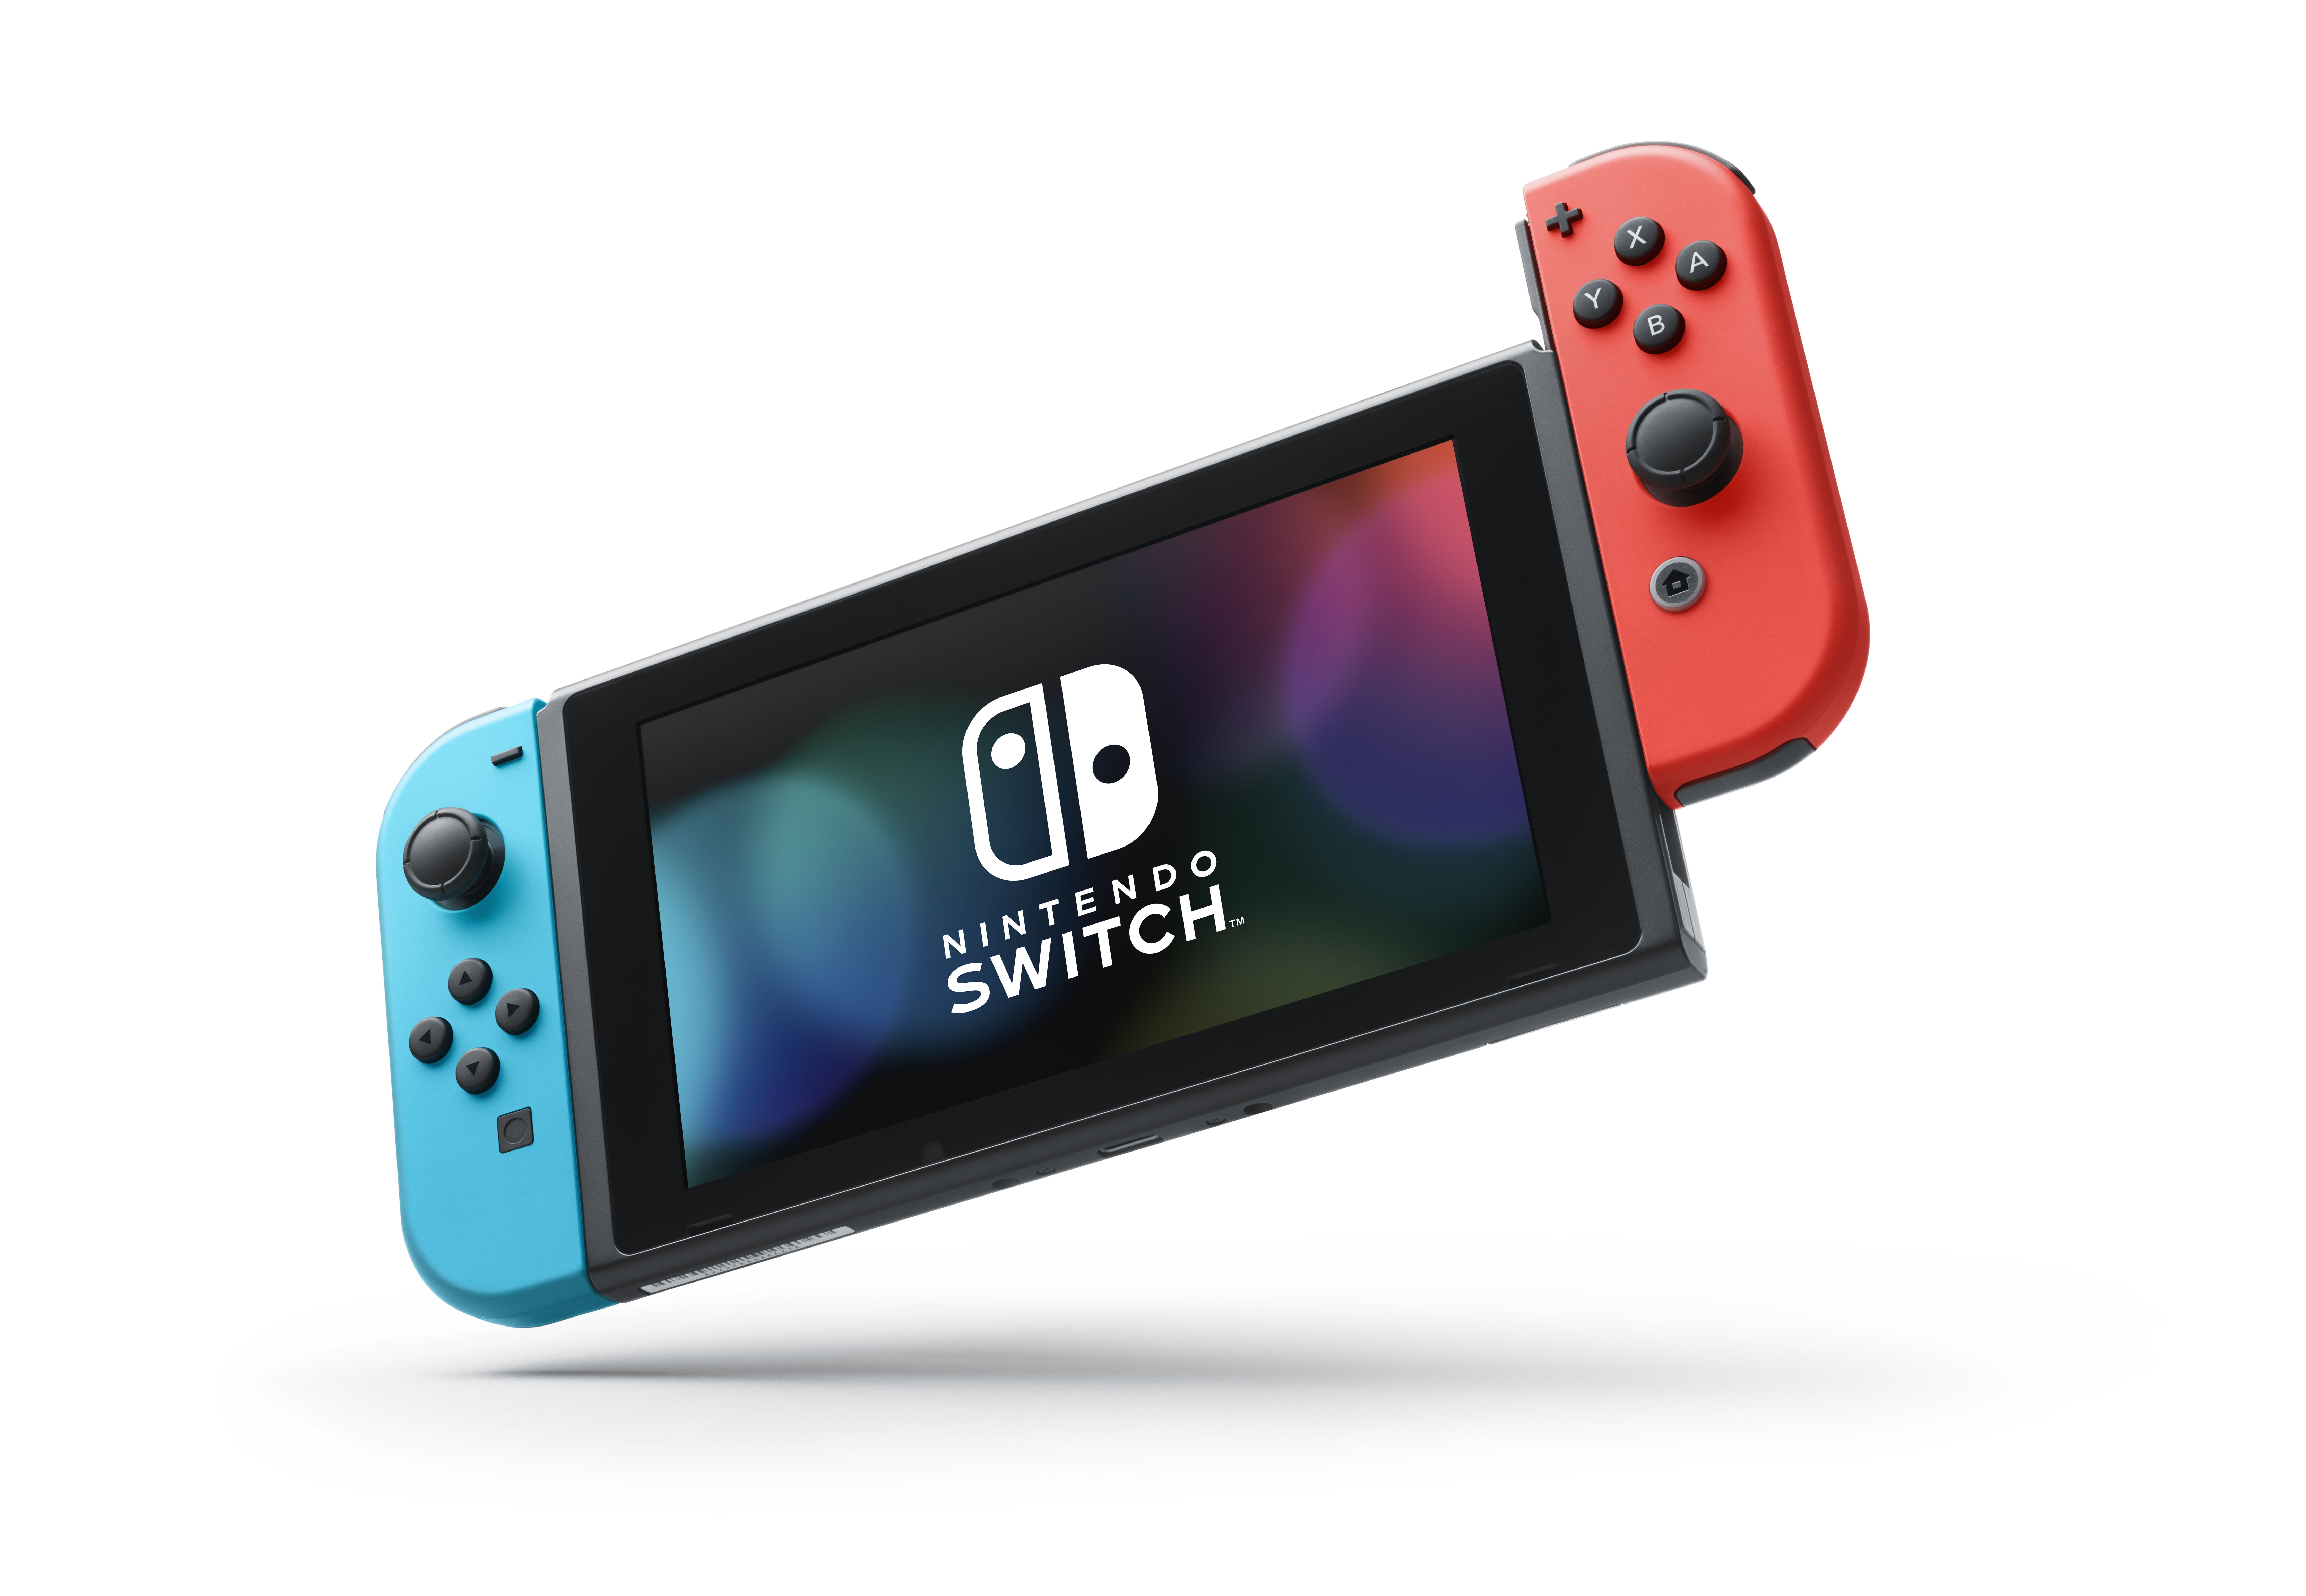 Picture of Nintendo Switch Red Blue